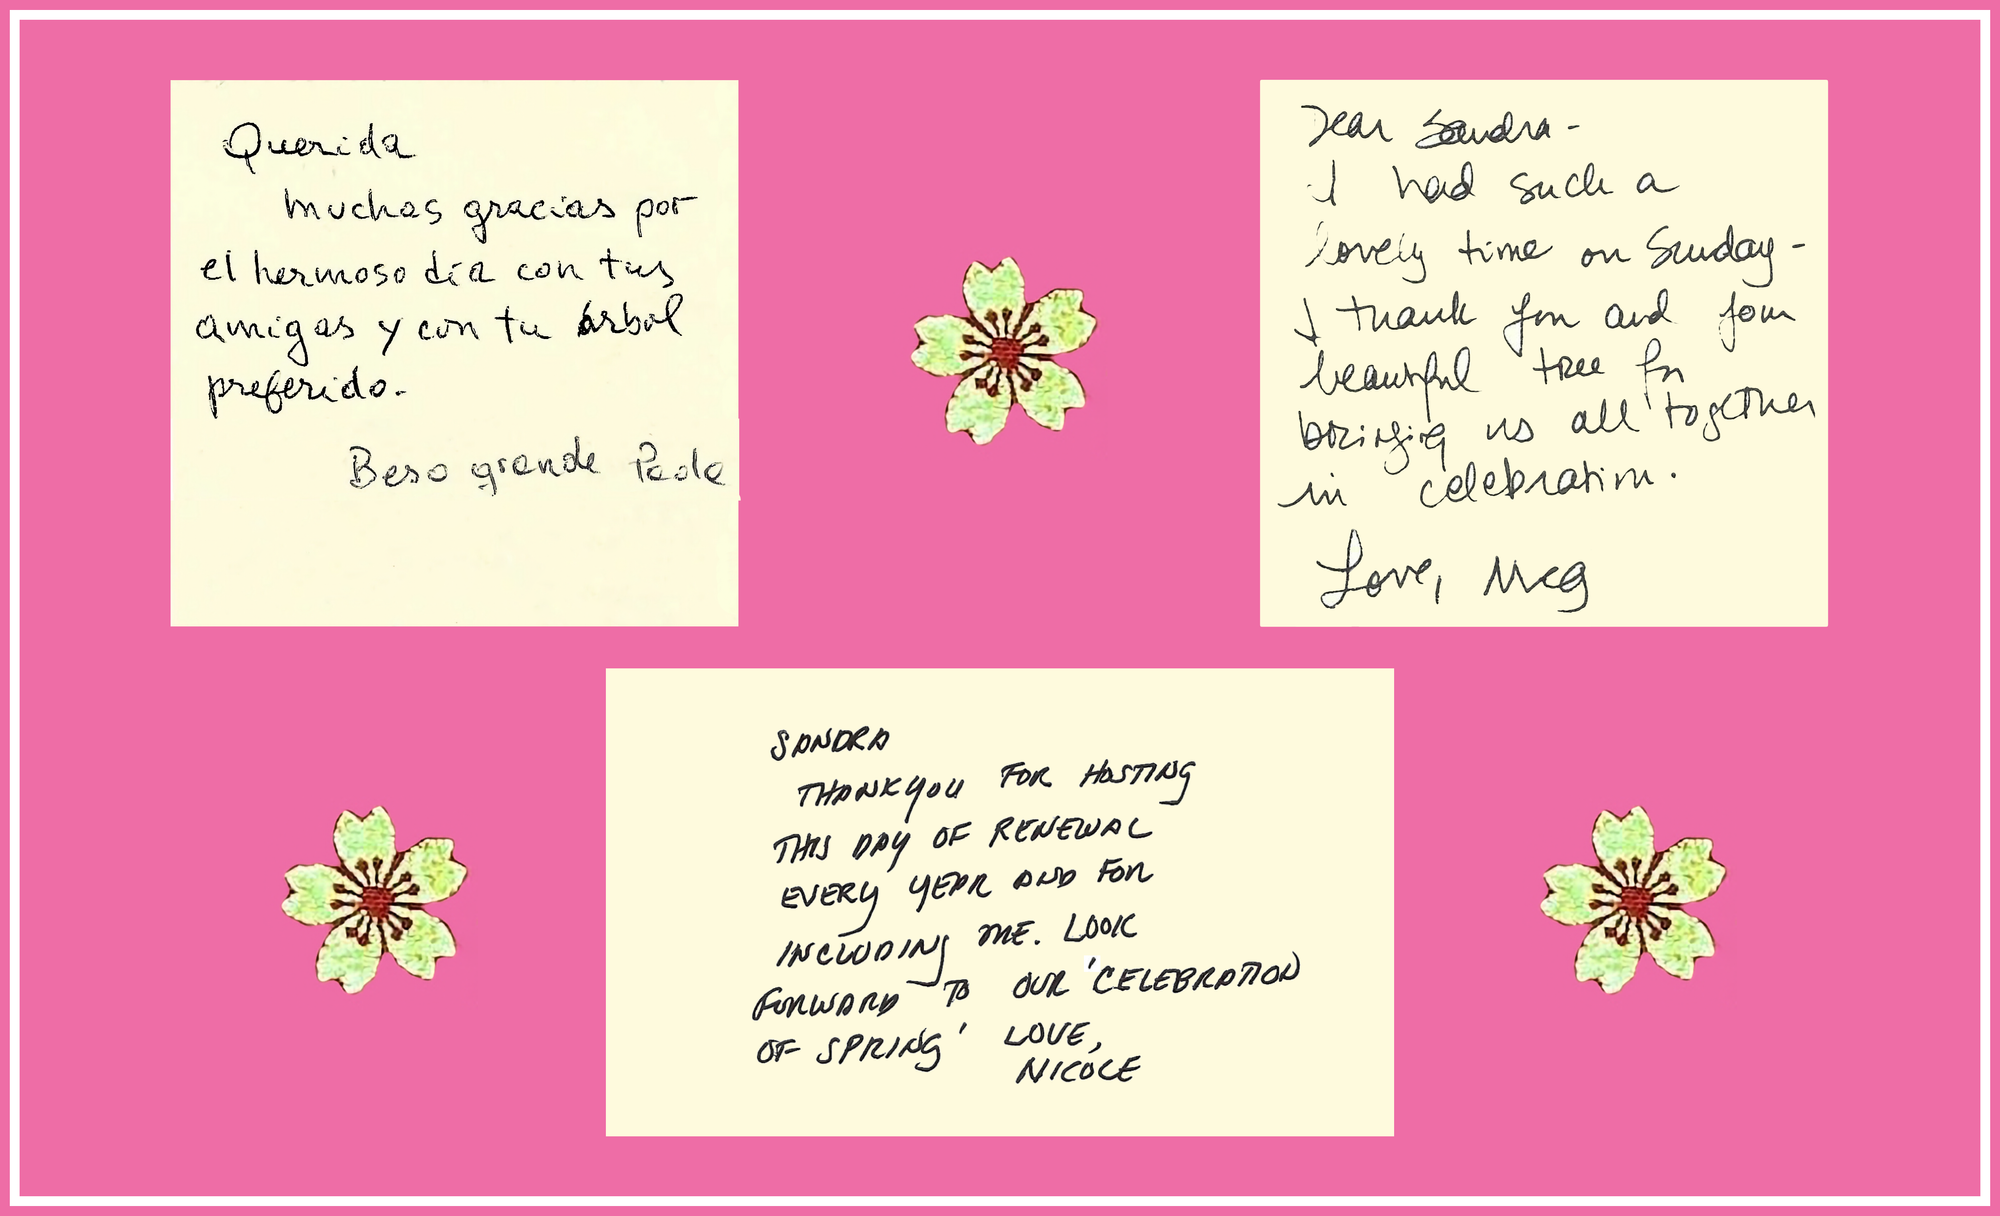 Image of three thank-you notes from party attendees agains a rose background with ornamental blossoms